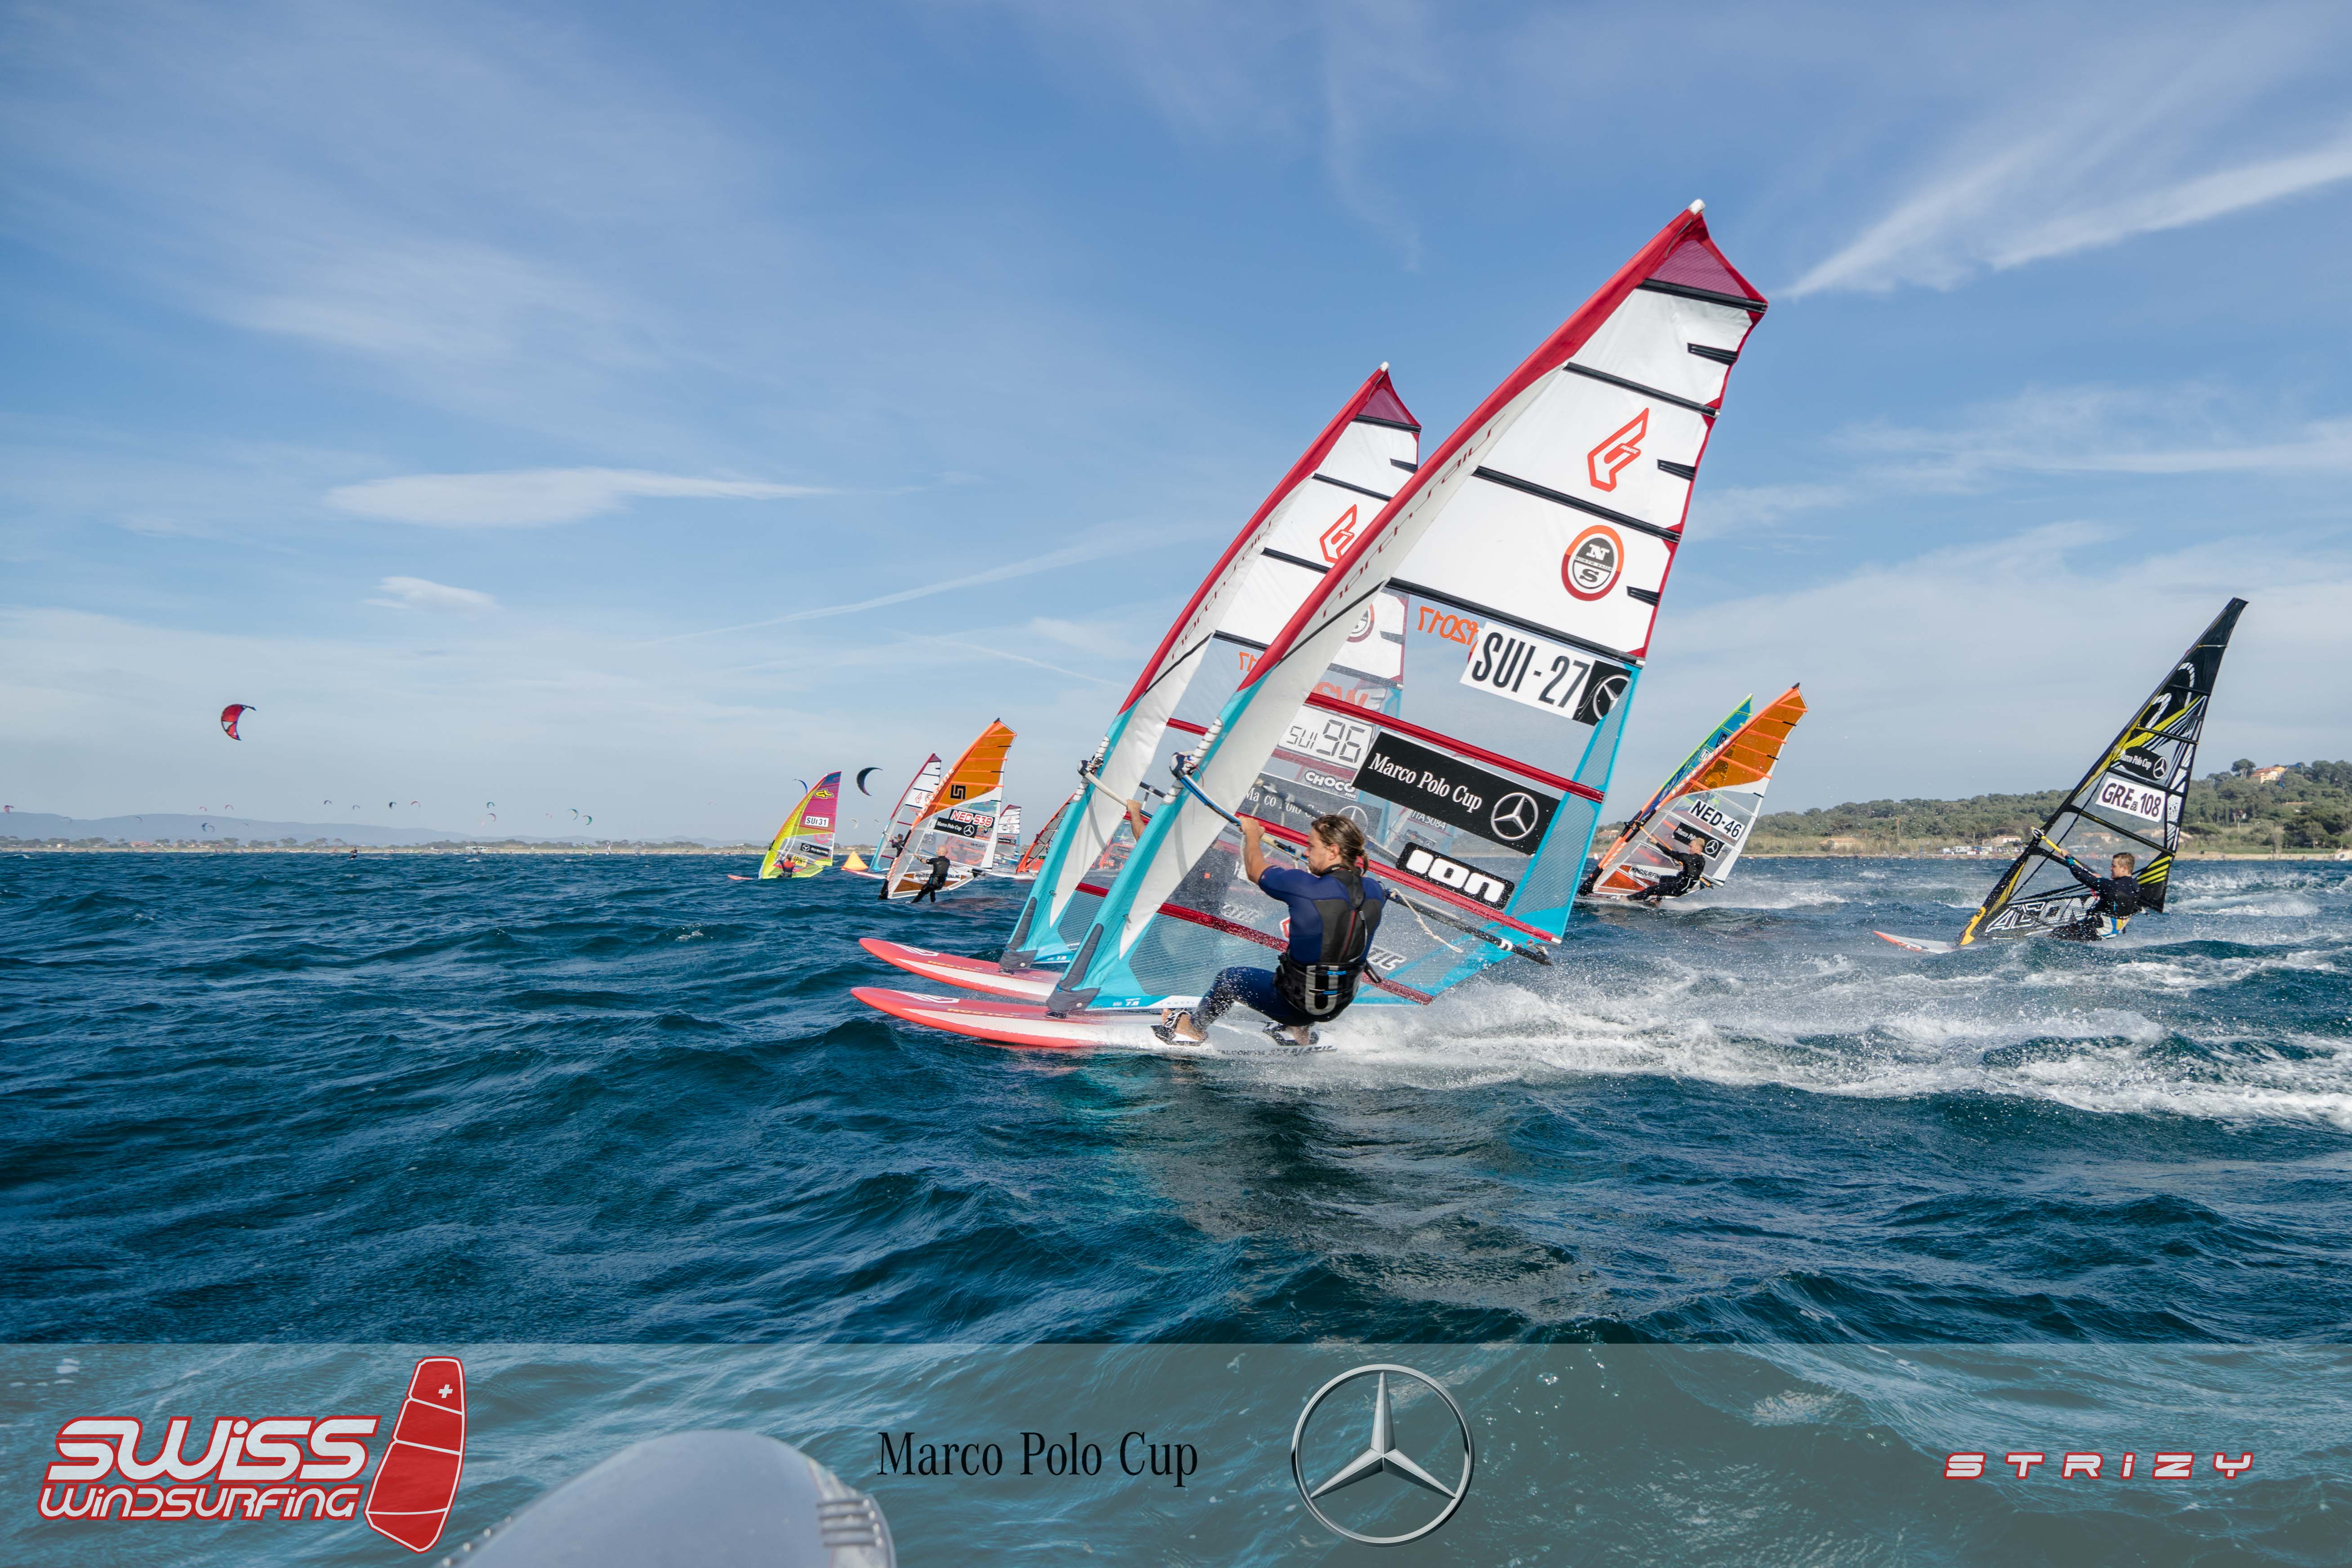  Windsurfing  Marco Polo Cup  Slalom  Hyeres FRA  Day 2